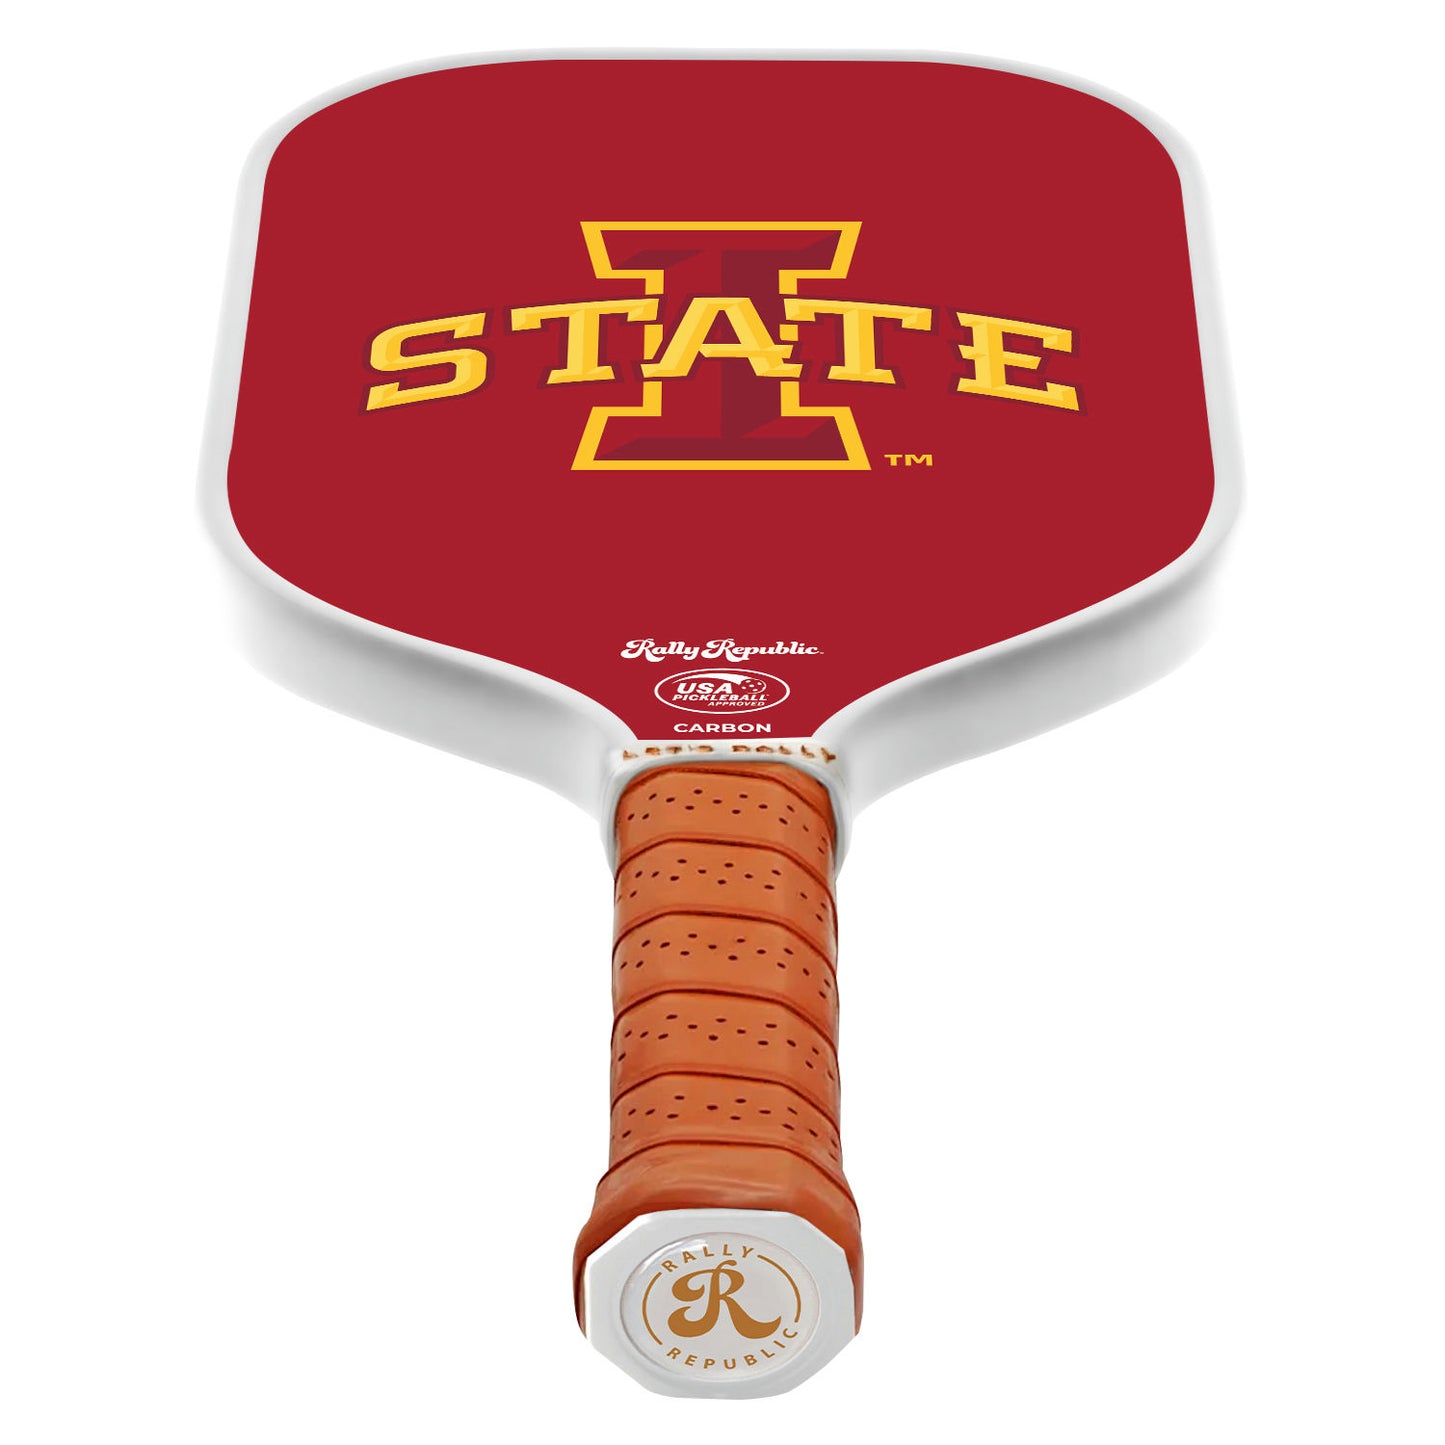 Iowa State Cyclones Cardinal Primary Athletic Mark Pickleball Paddle